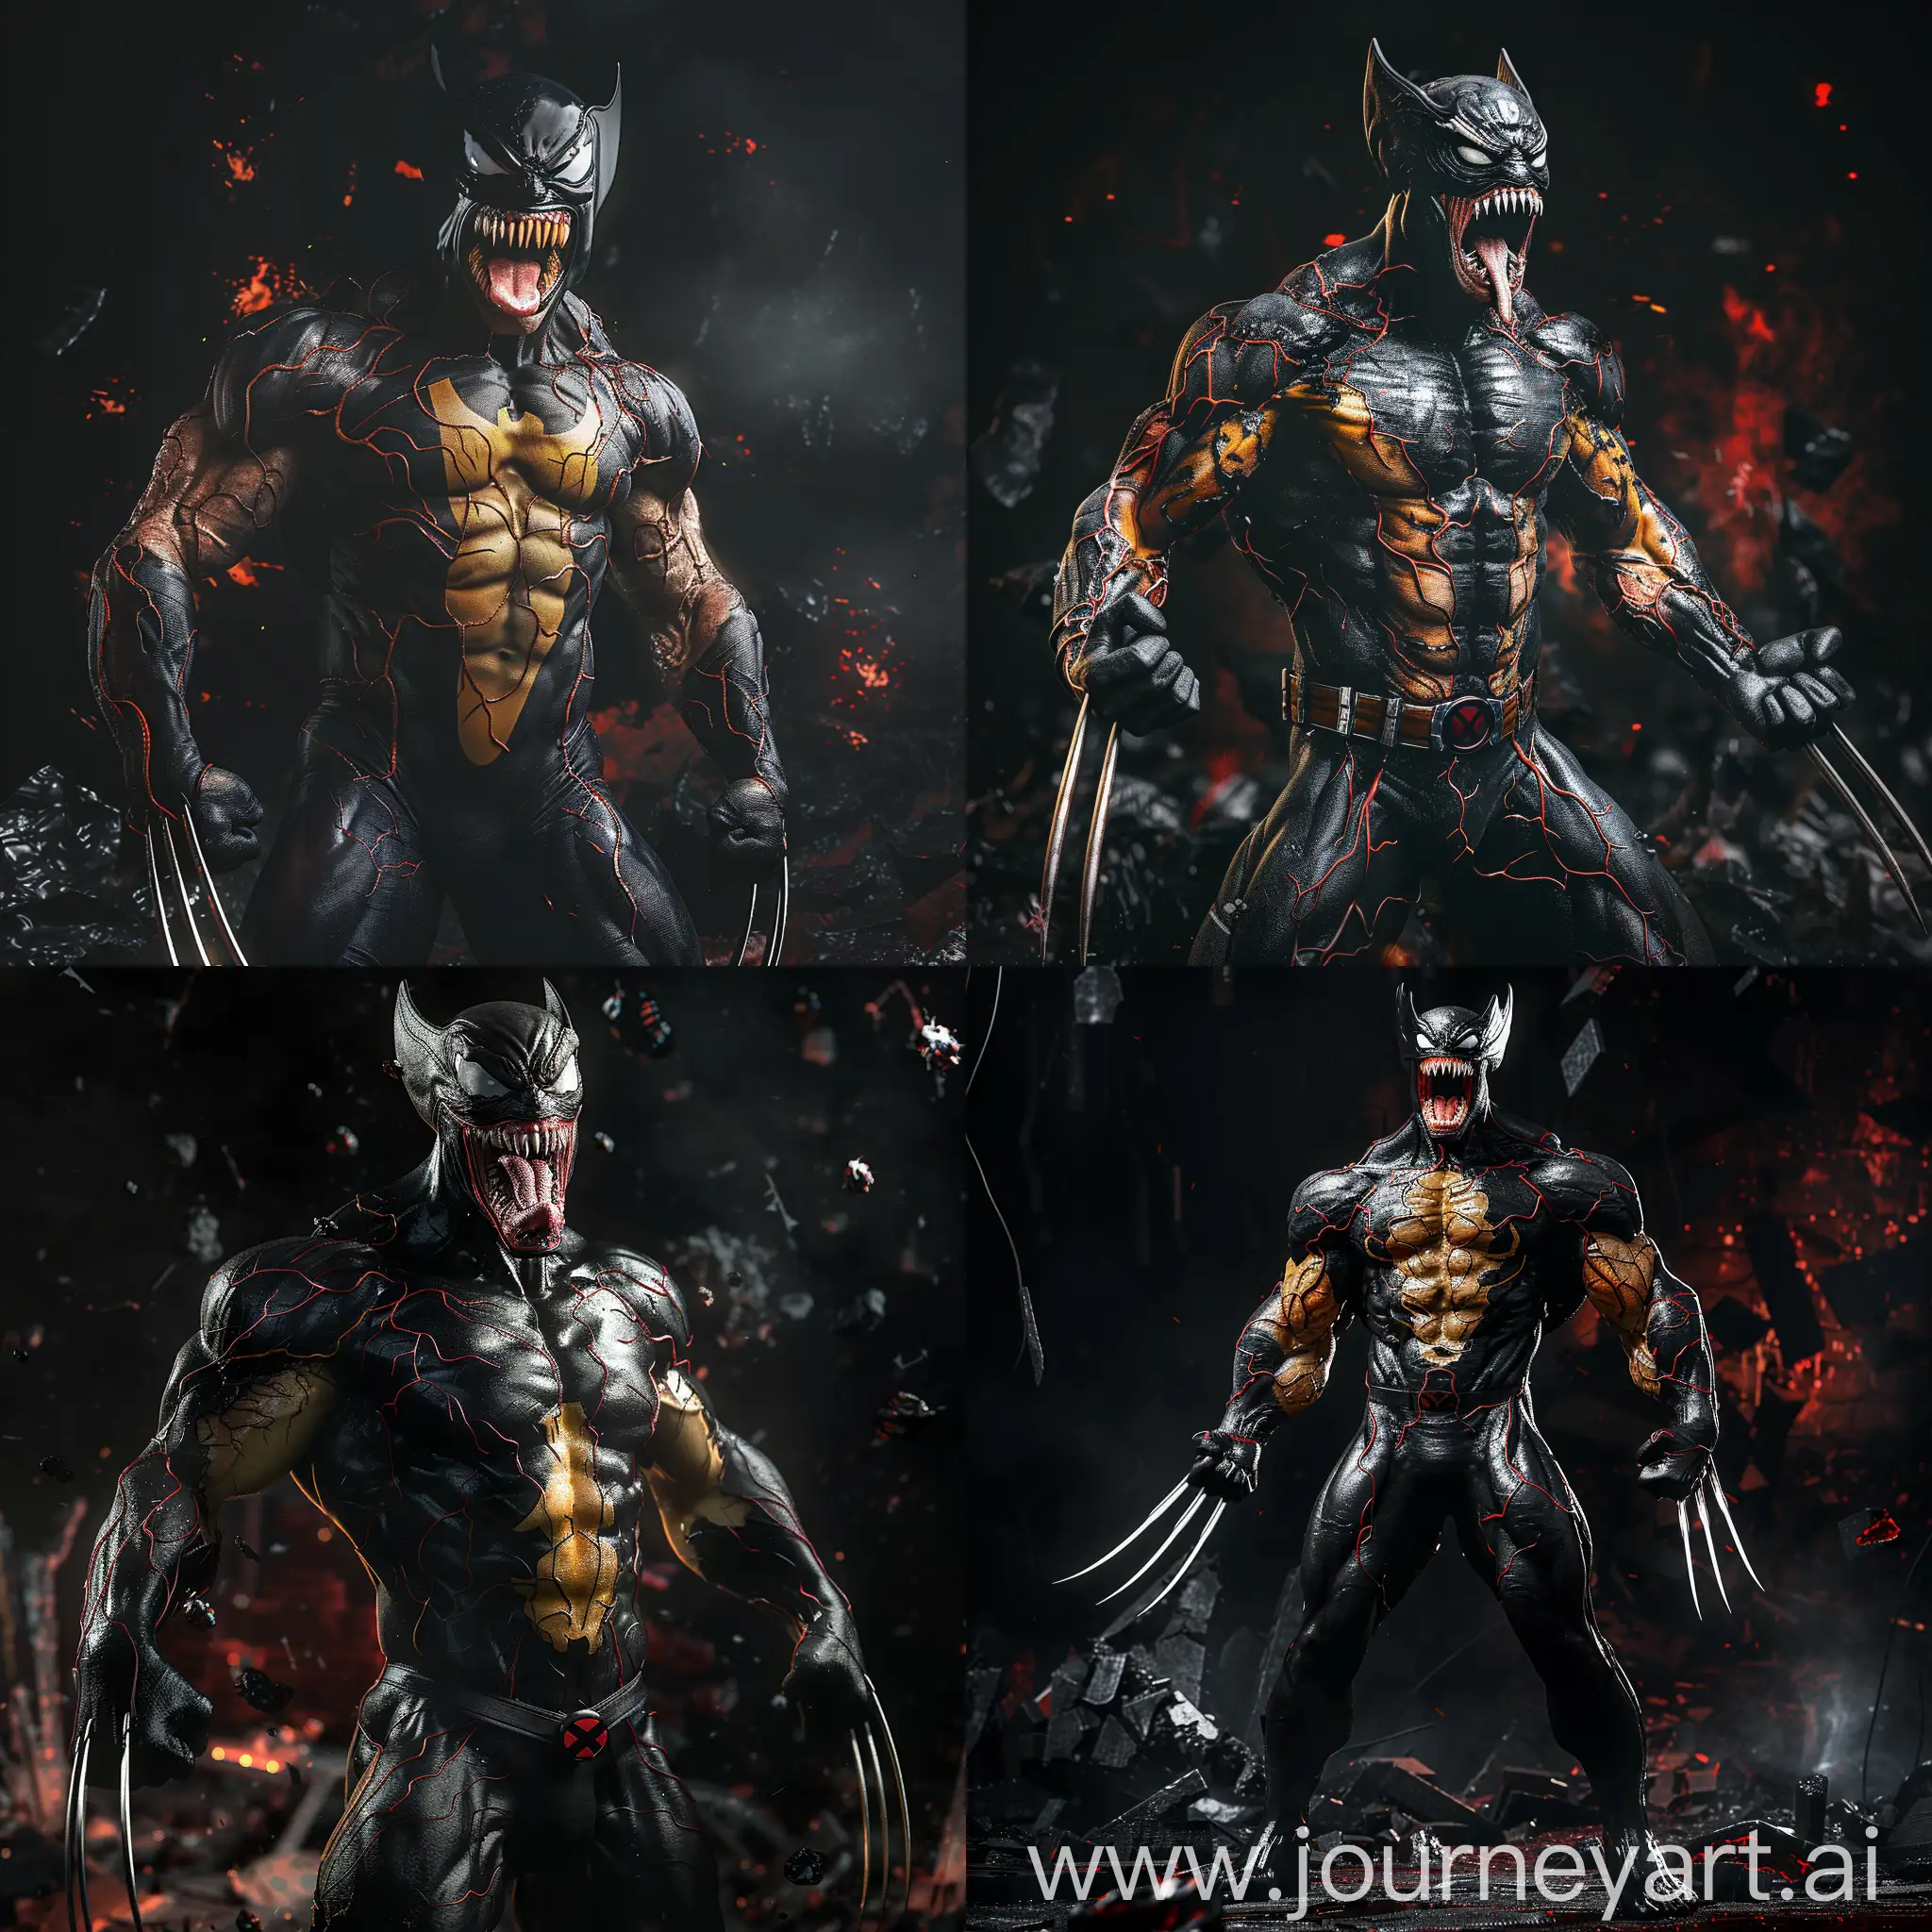 Dynamic pose, Marvel Wolverine as Marvel Venom, open mouth, veiny and large muscles, looking at camera, black and red shades of background, standing semi-sideways, full body pose, realism, ultra-detailed dark background with destruction, cinematic, 8k, hd